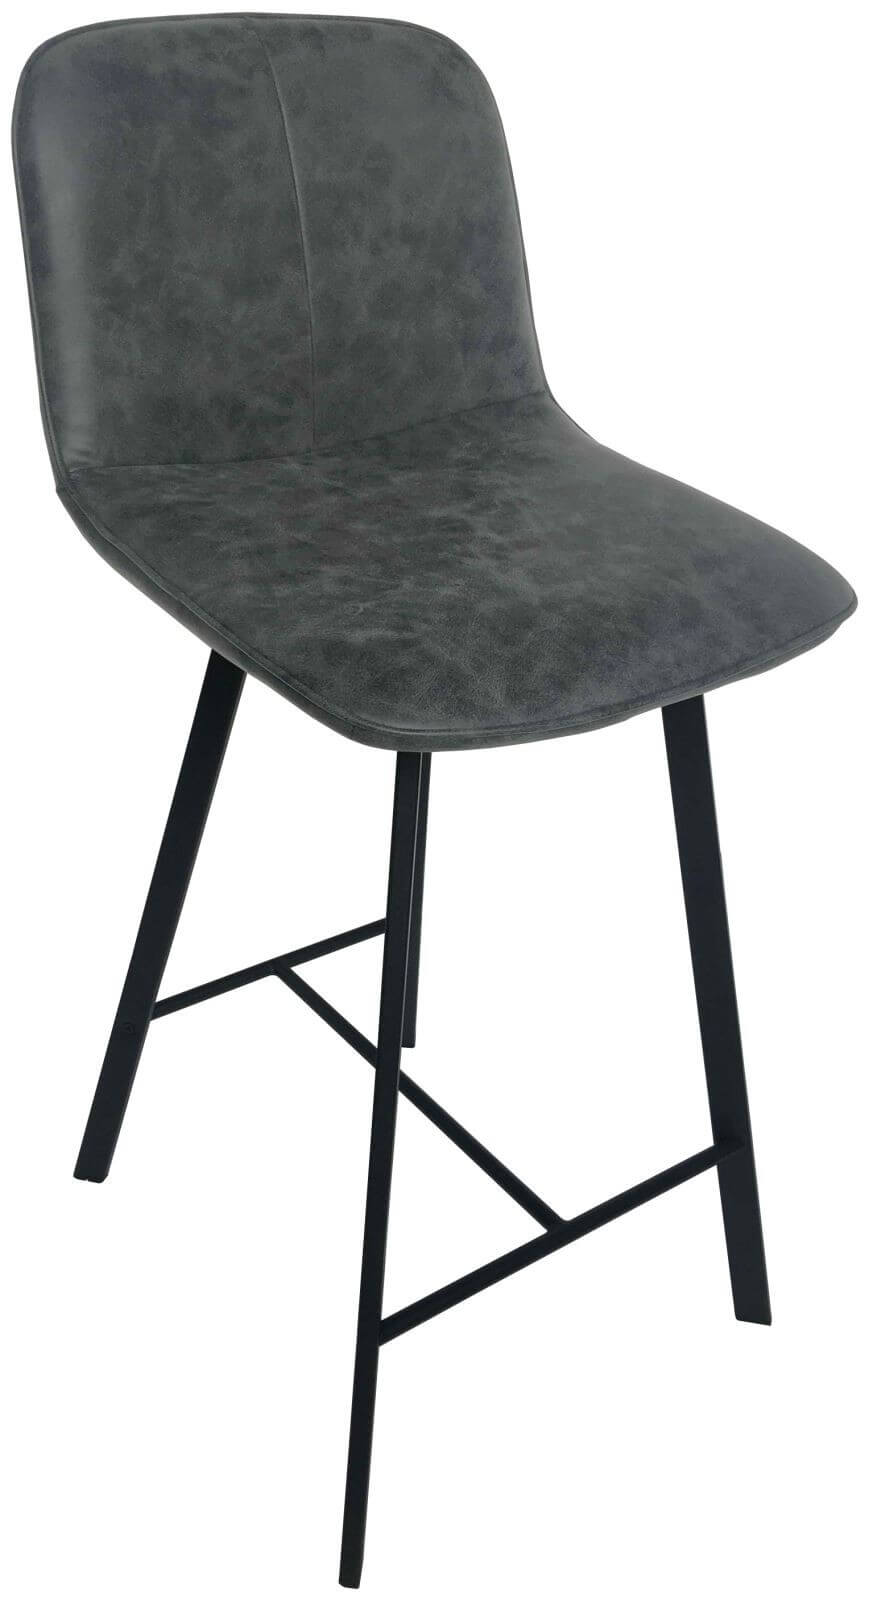 Showing image for Fengo bar stool